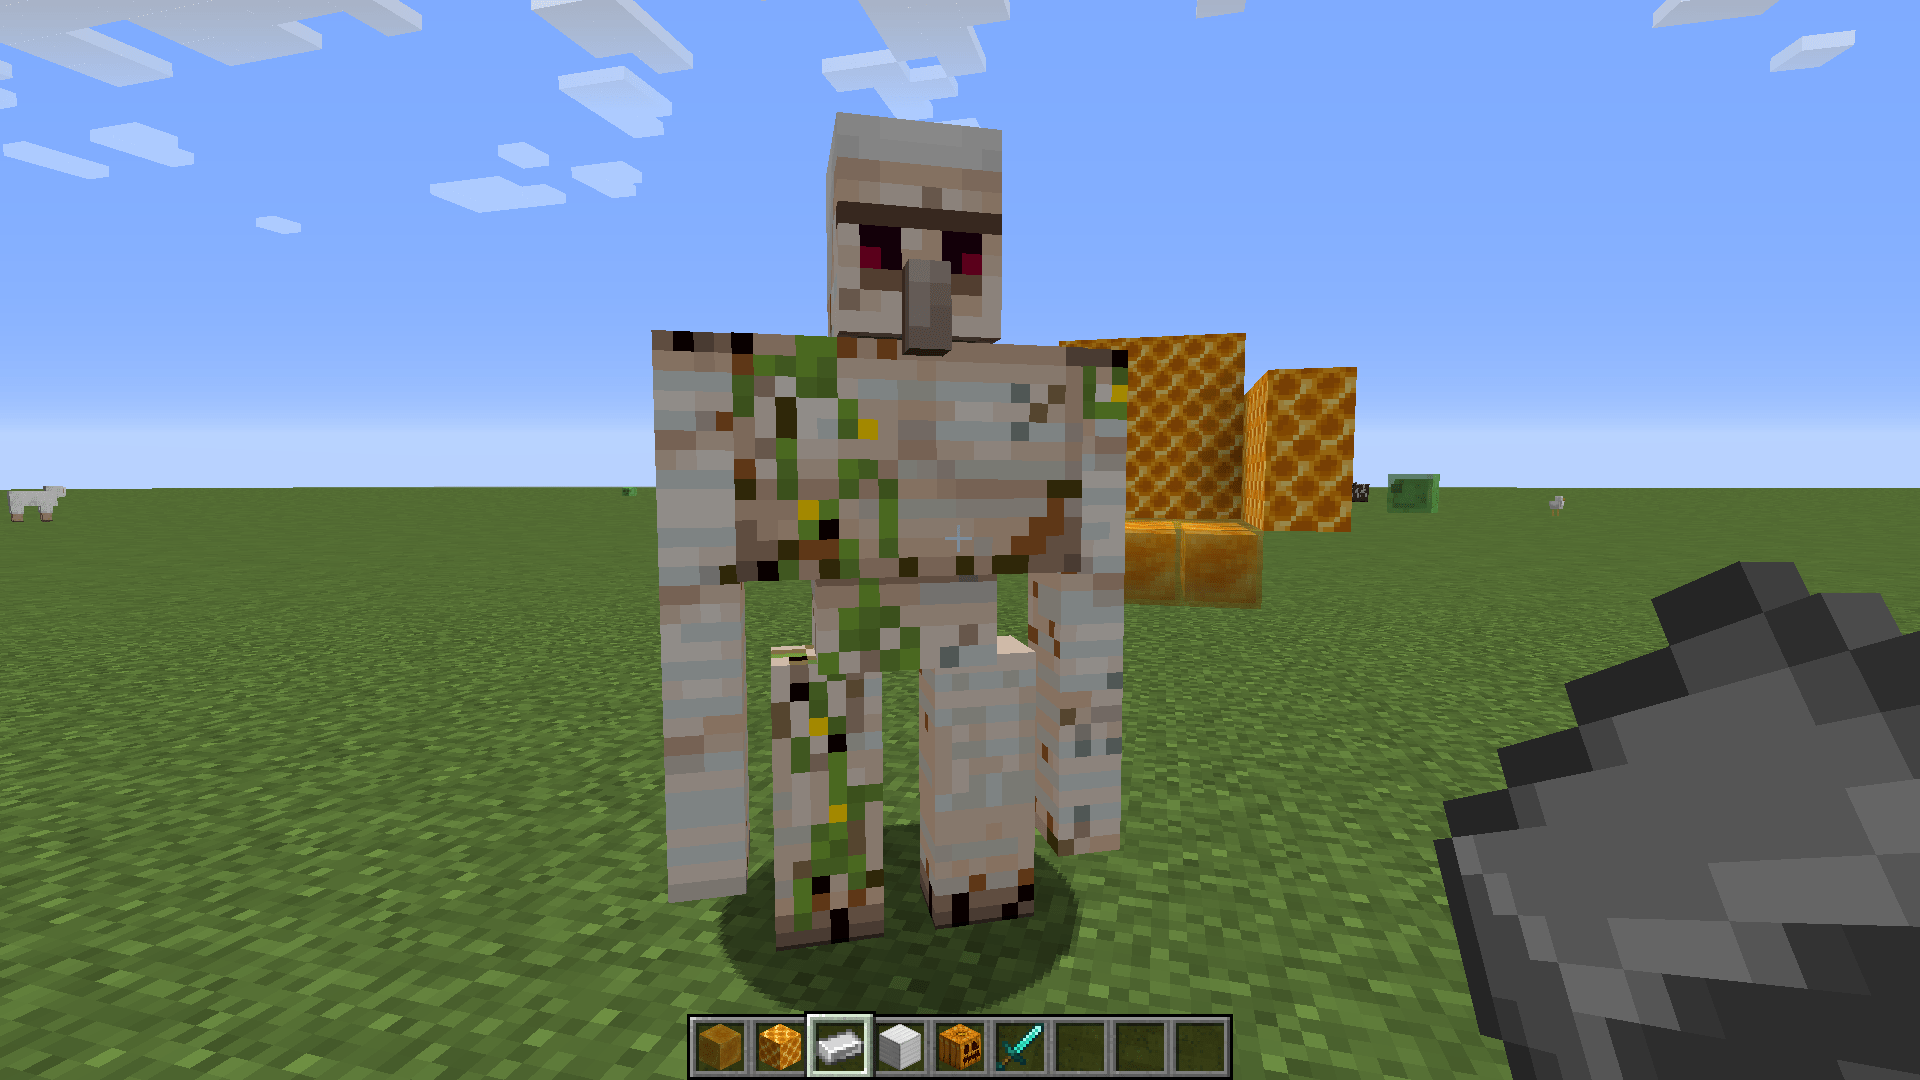 Minecraft: How to Make an Iron Golem to Protect Your Base - Tech